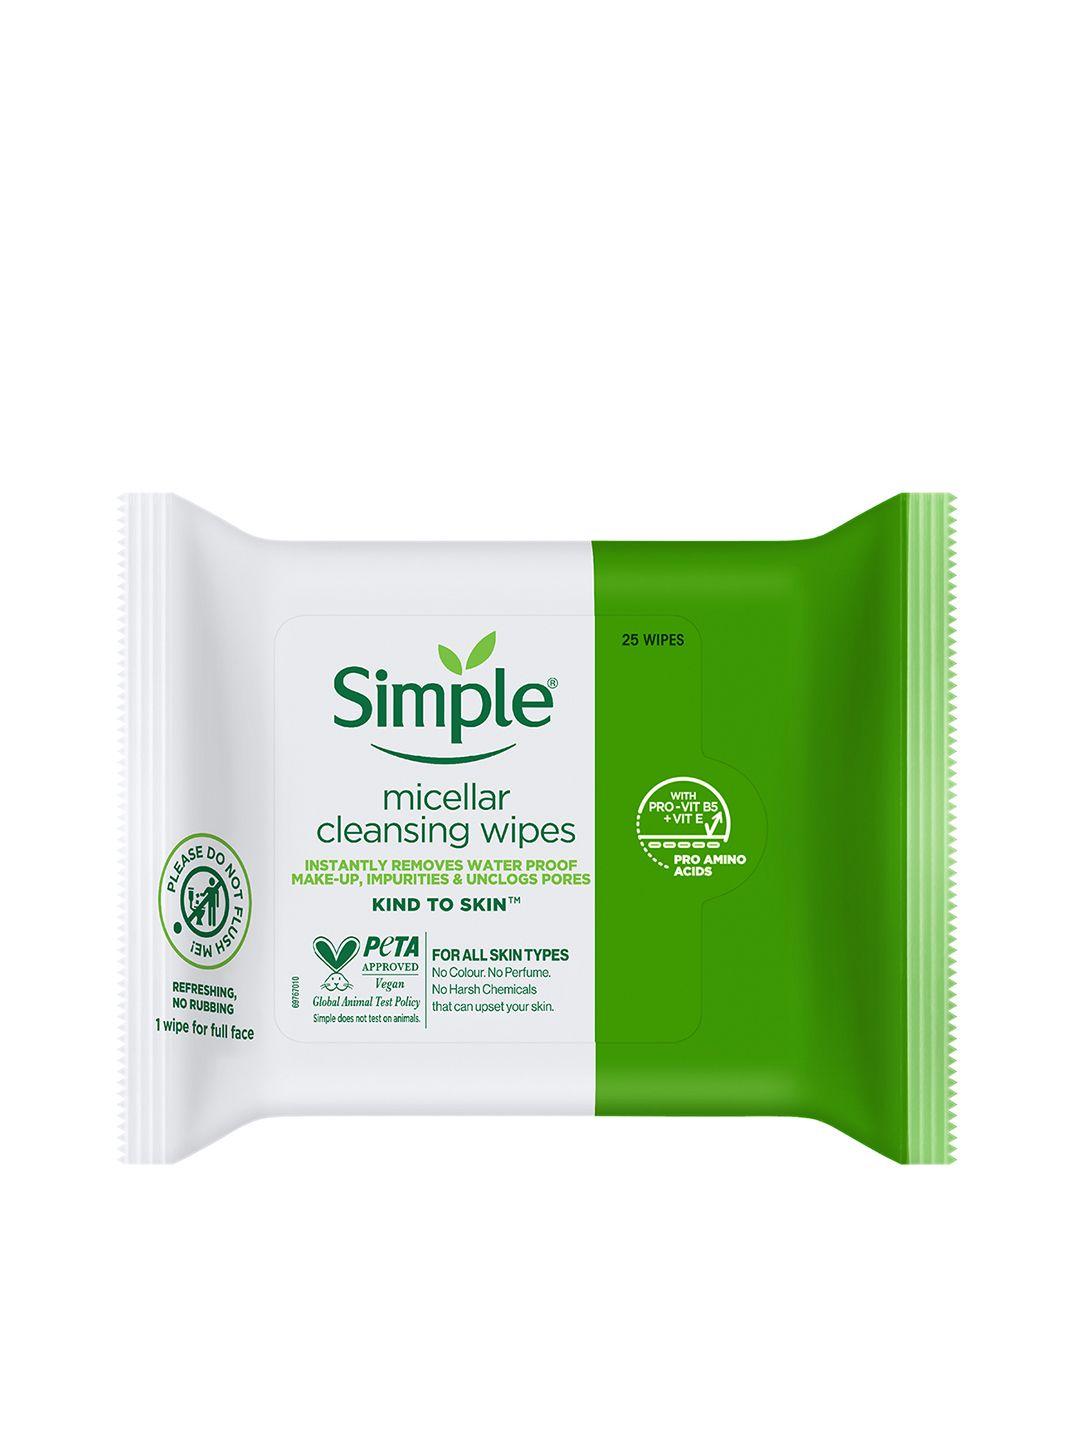 simple kind to skin micellar cleansing wipes